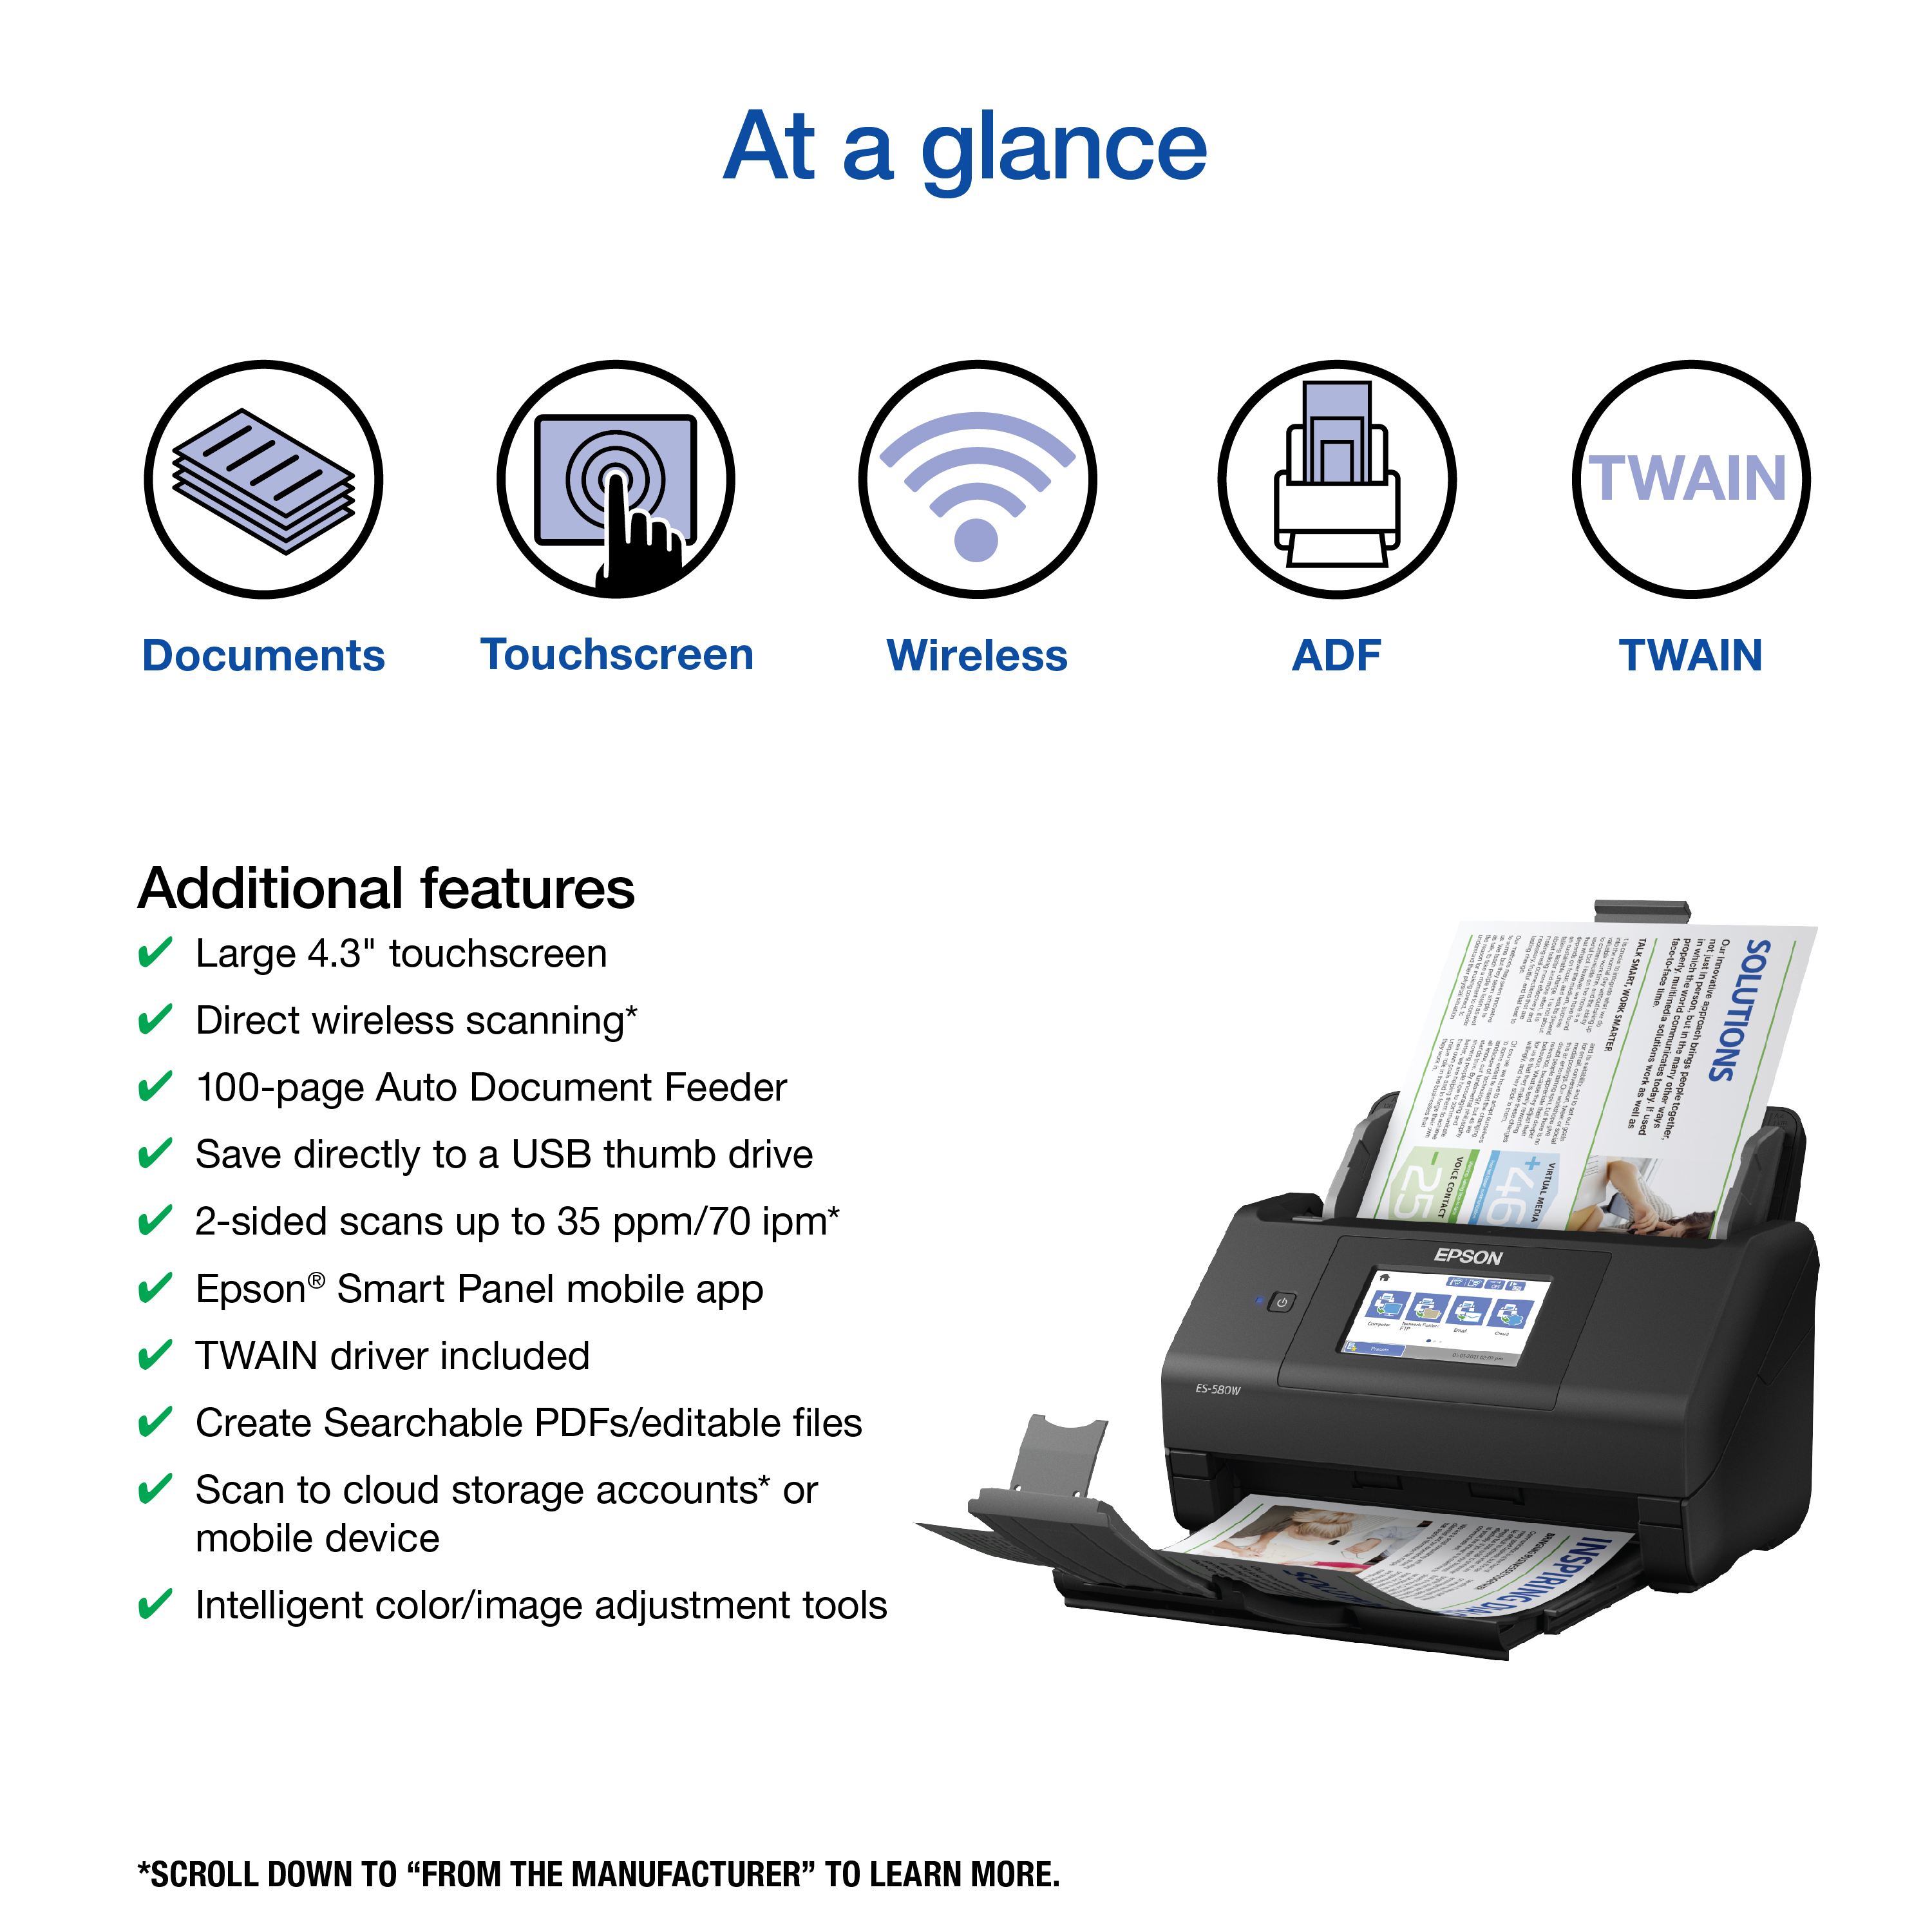 Epson WorkForce ES-580W Wireless Color Duplex Desktop Document Scanner for PC and Mac with 100-sheet Auto Document Feeder (ADF) and Intuitive 4.3" Touchscreen - image 2 of 8